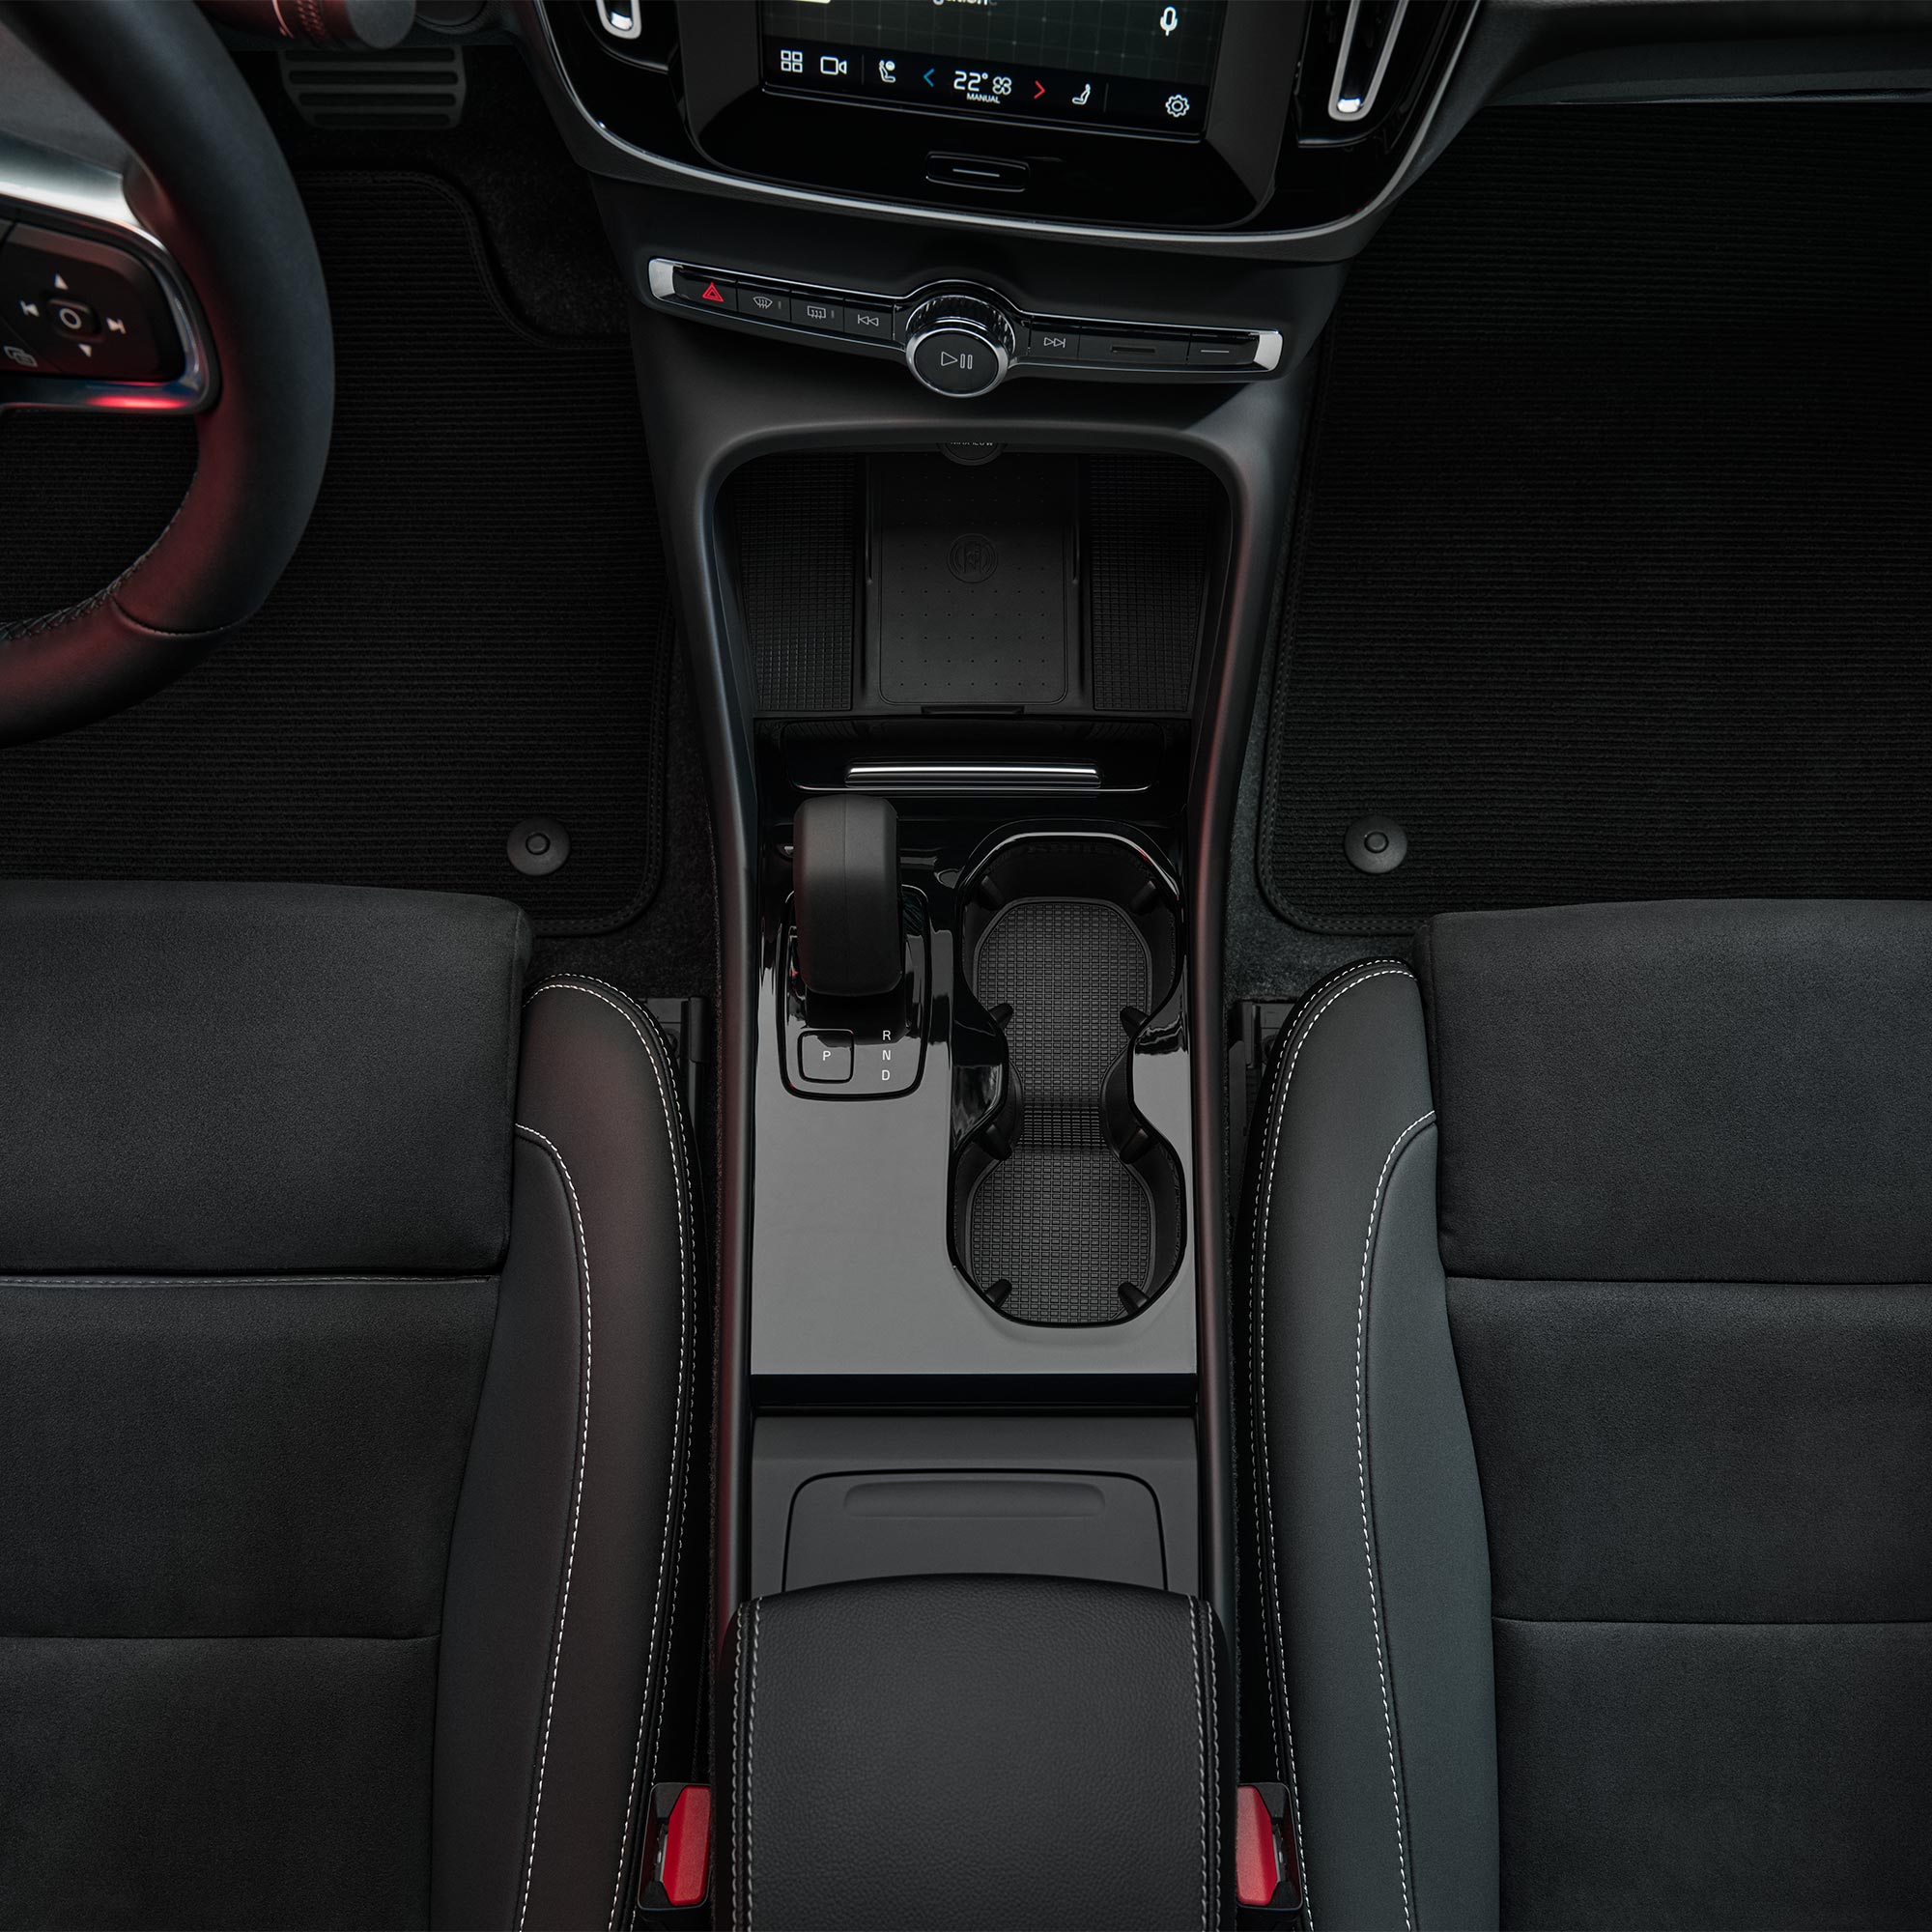 Volvo C40 Recharge cupholders and front seat storage.